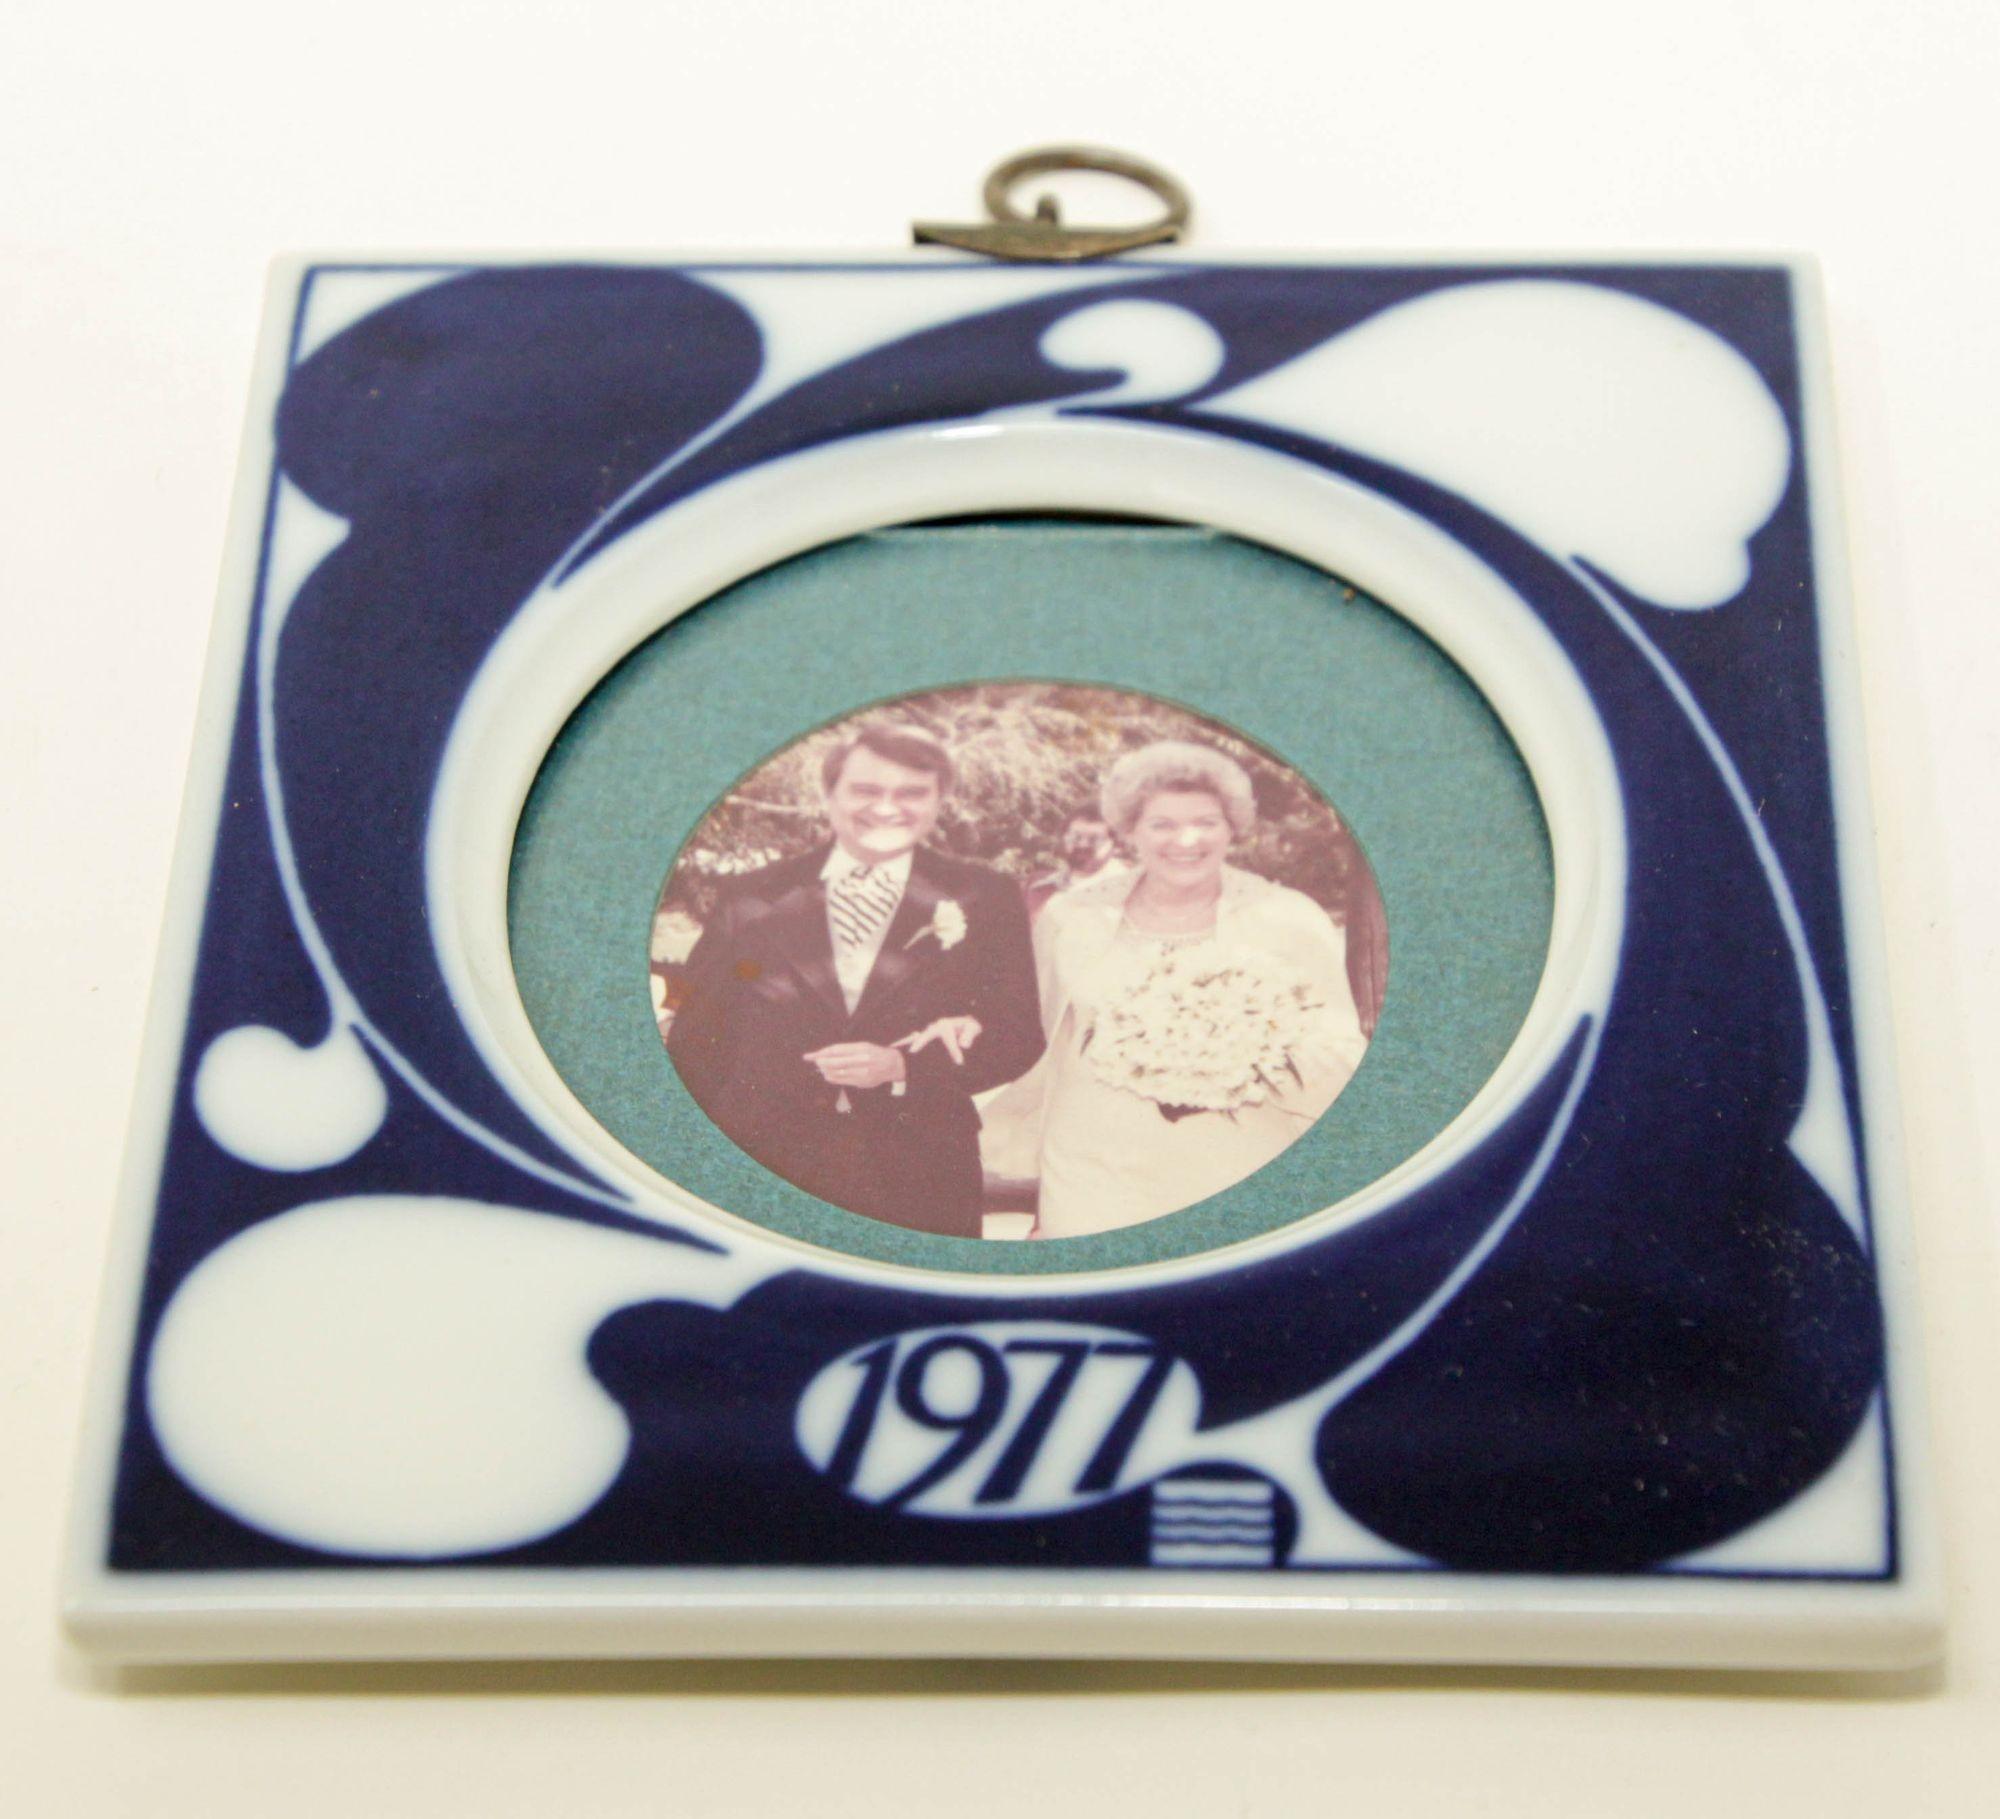 Vintage Denmark, 1977, blue and white porcelain picture frame.
1977, Royal Copenhagen Denmark blue & white porcelain photo frame.
Collectible Royal Copenhagen annual porcelain photo frame 1977.
Technique: under glazed year of release: 1977
The